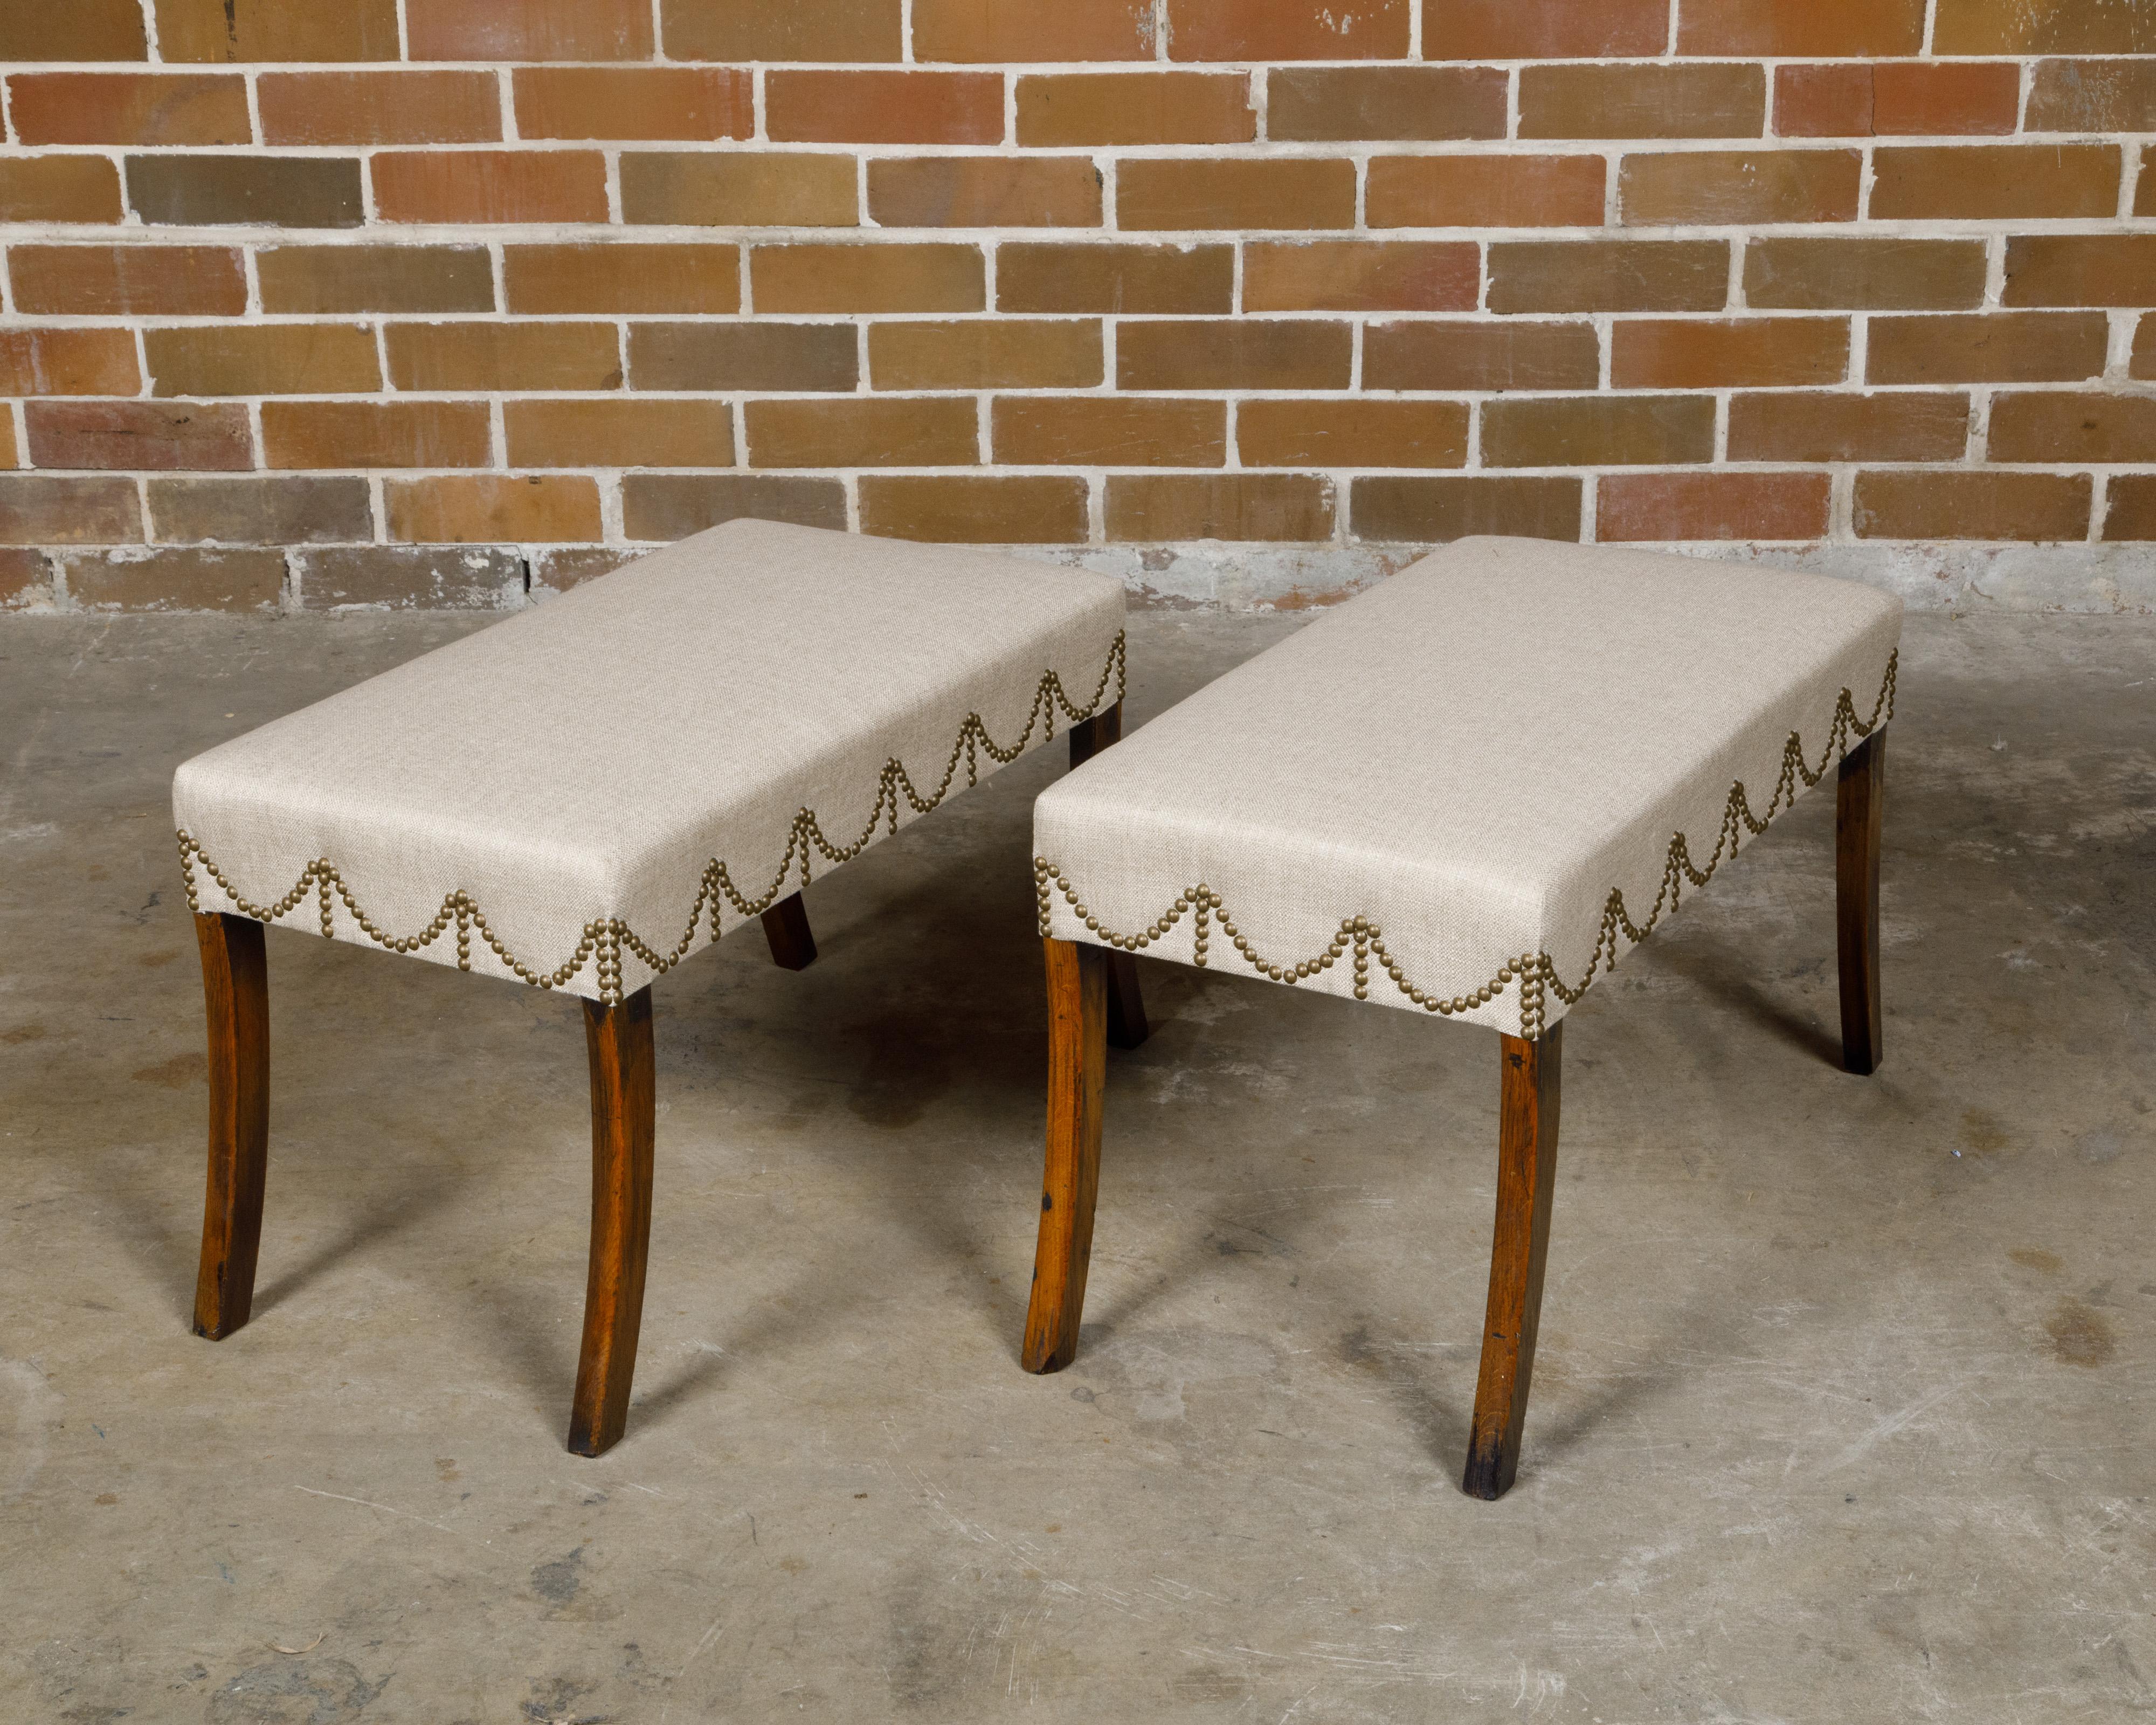 A pair of English Regency period mahogany rectangular stools from the 19th century with saber legs and custom upholstery. This exquisite pair of English Regency period mahogany stools from the 19th century is a testament to the era's elegance and